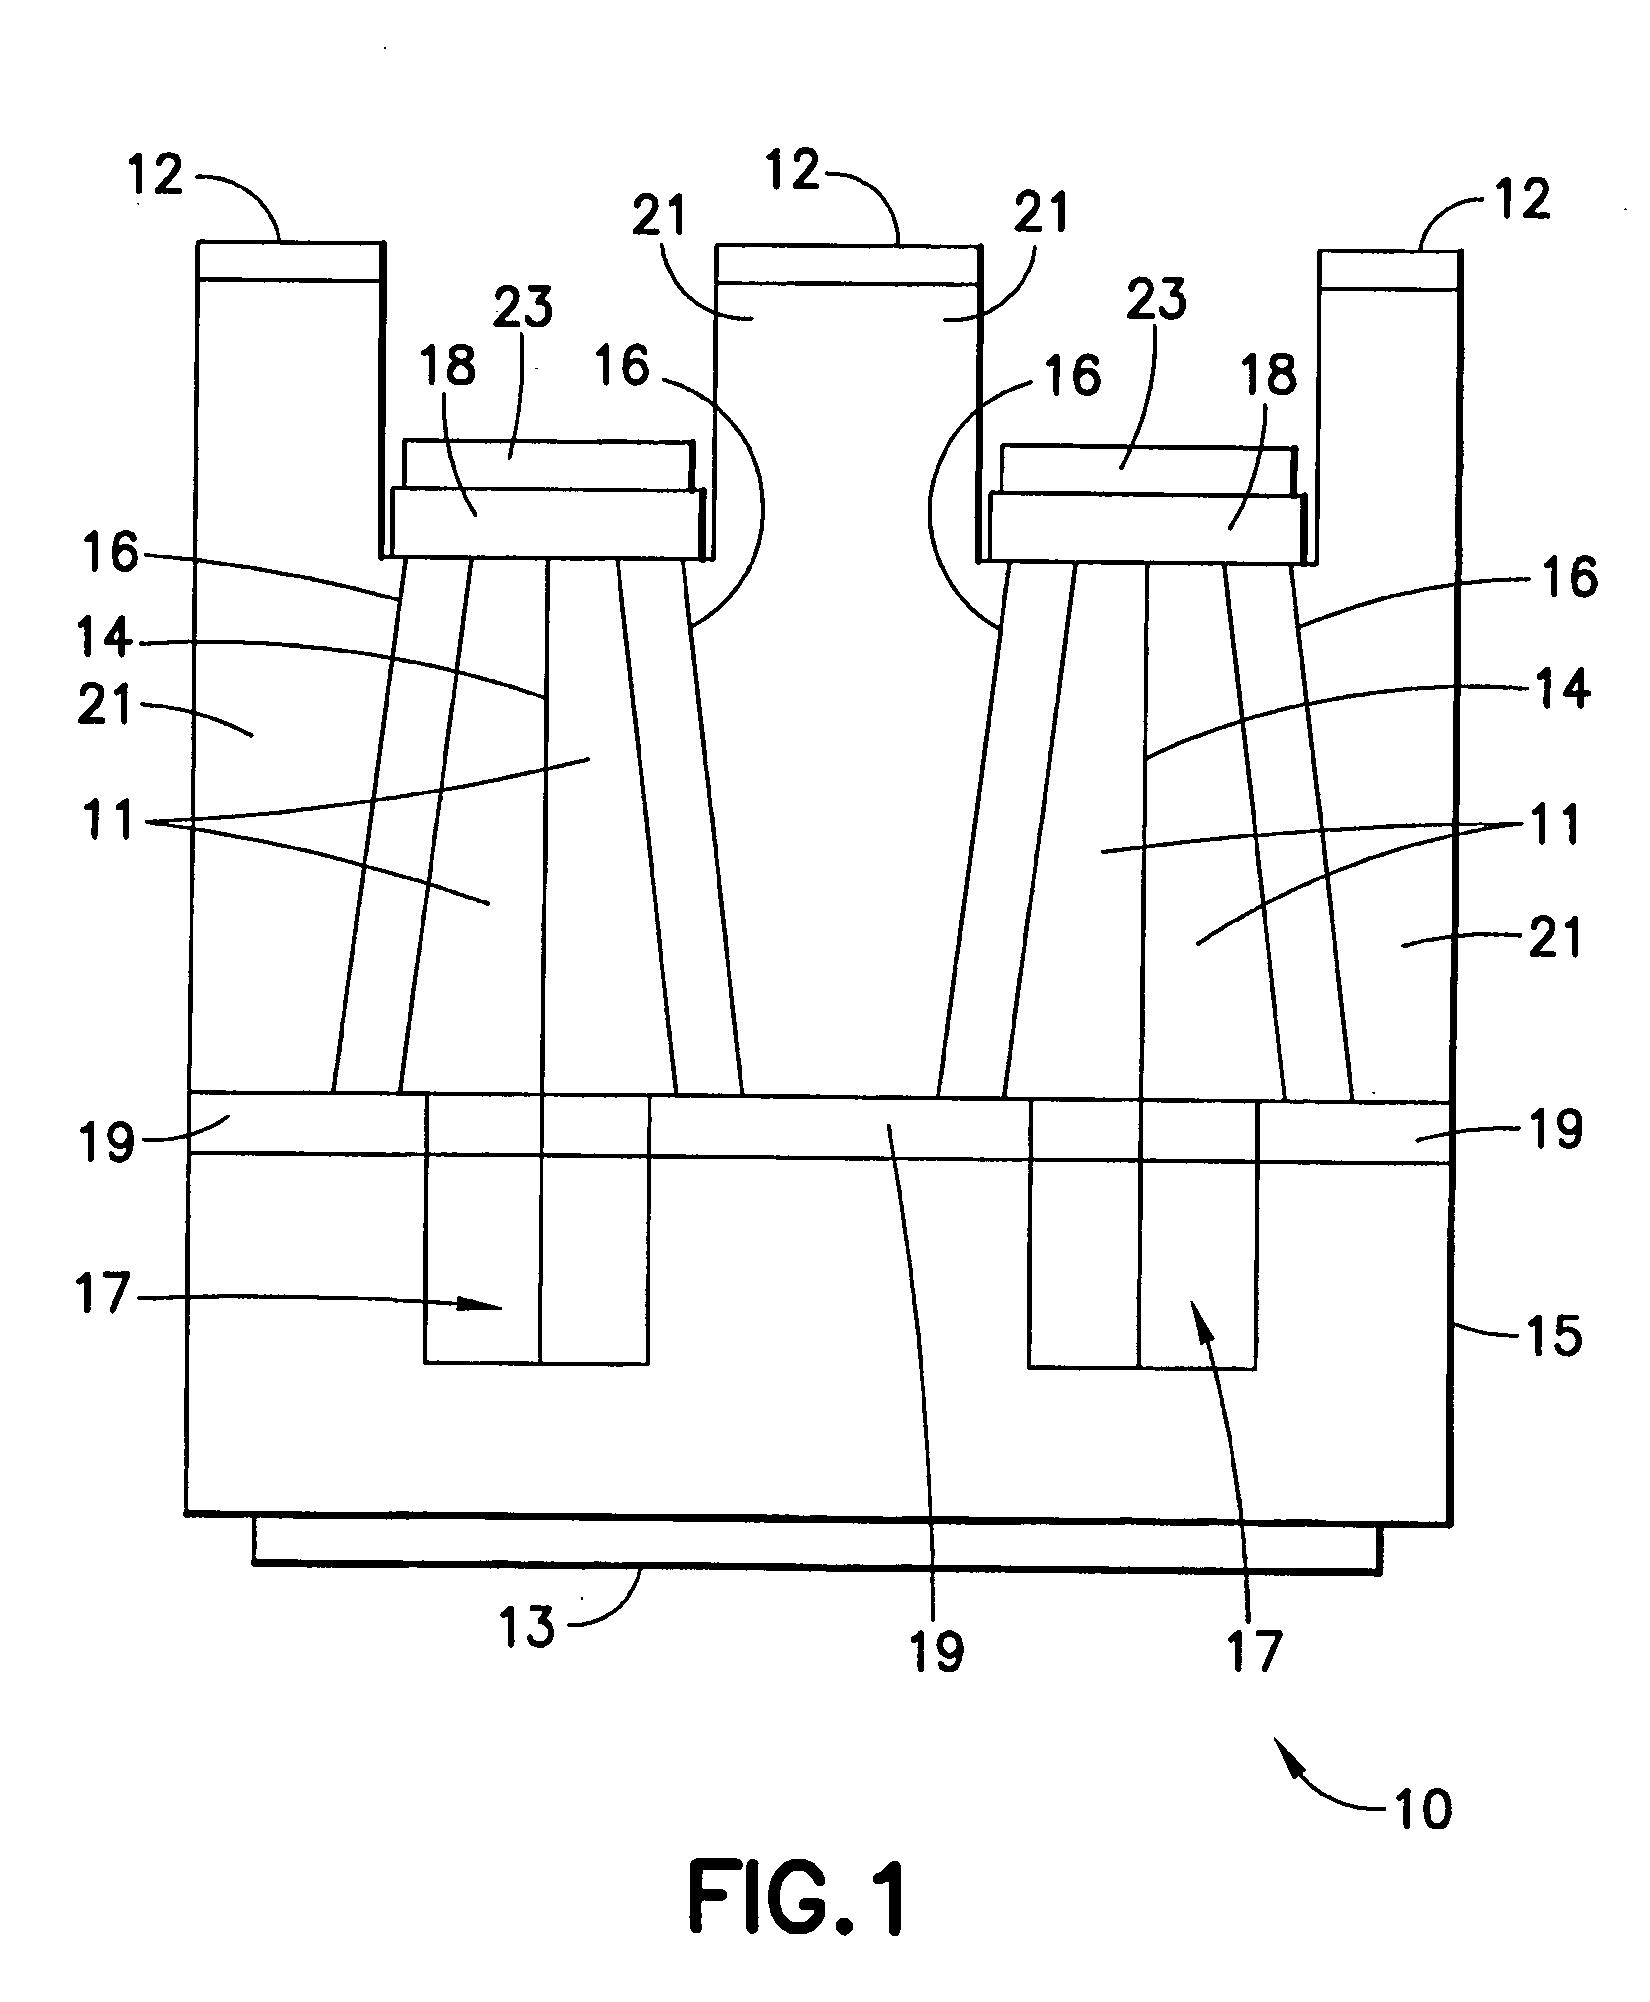 III-nitride device and method with variable epitaxial growth direction